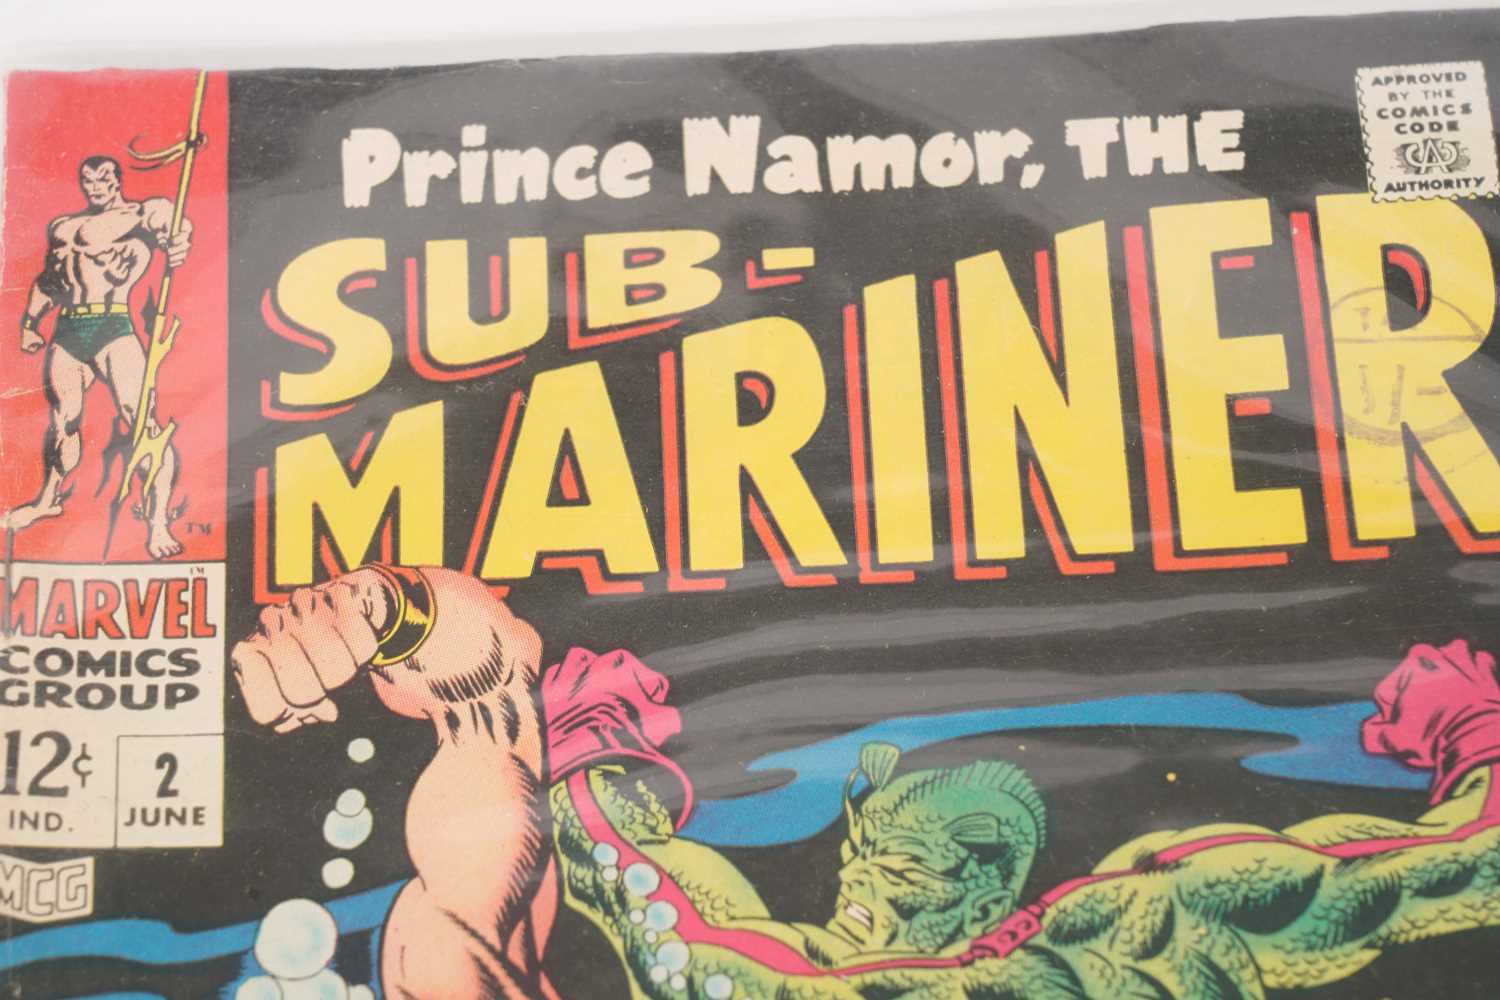 Prince Namor, The Sub-Mariner by Marvel Comics - Image 2 of 7